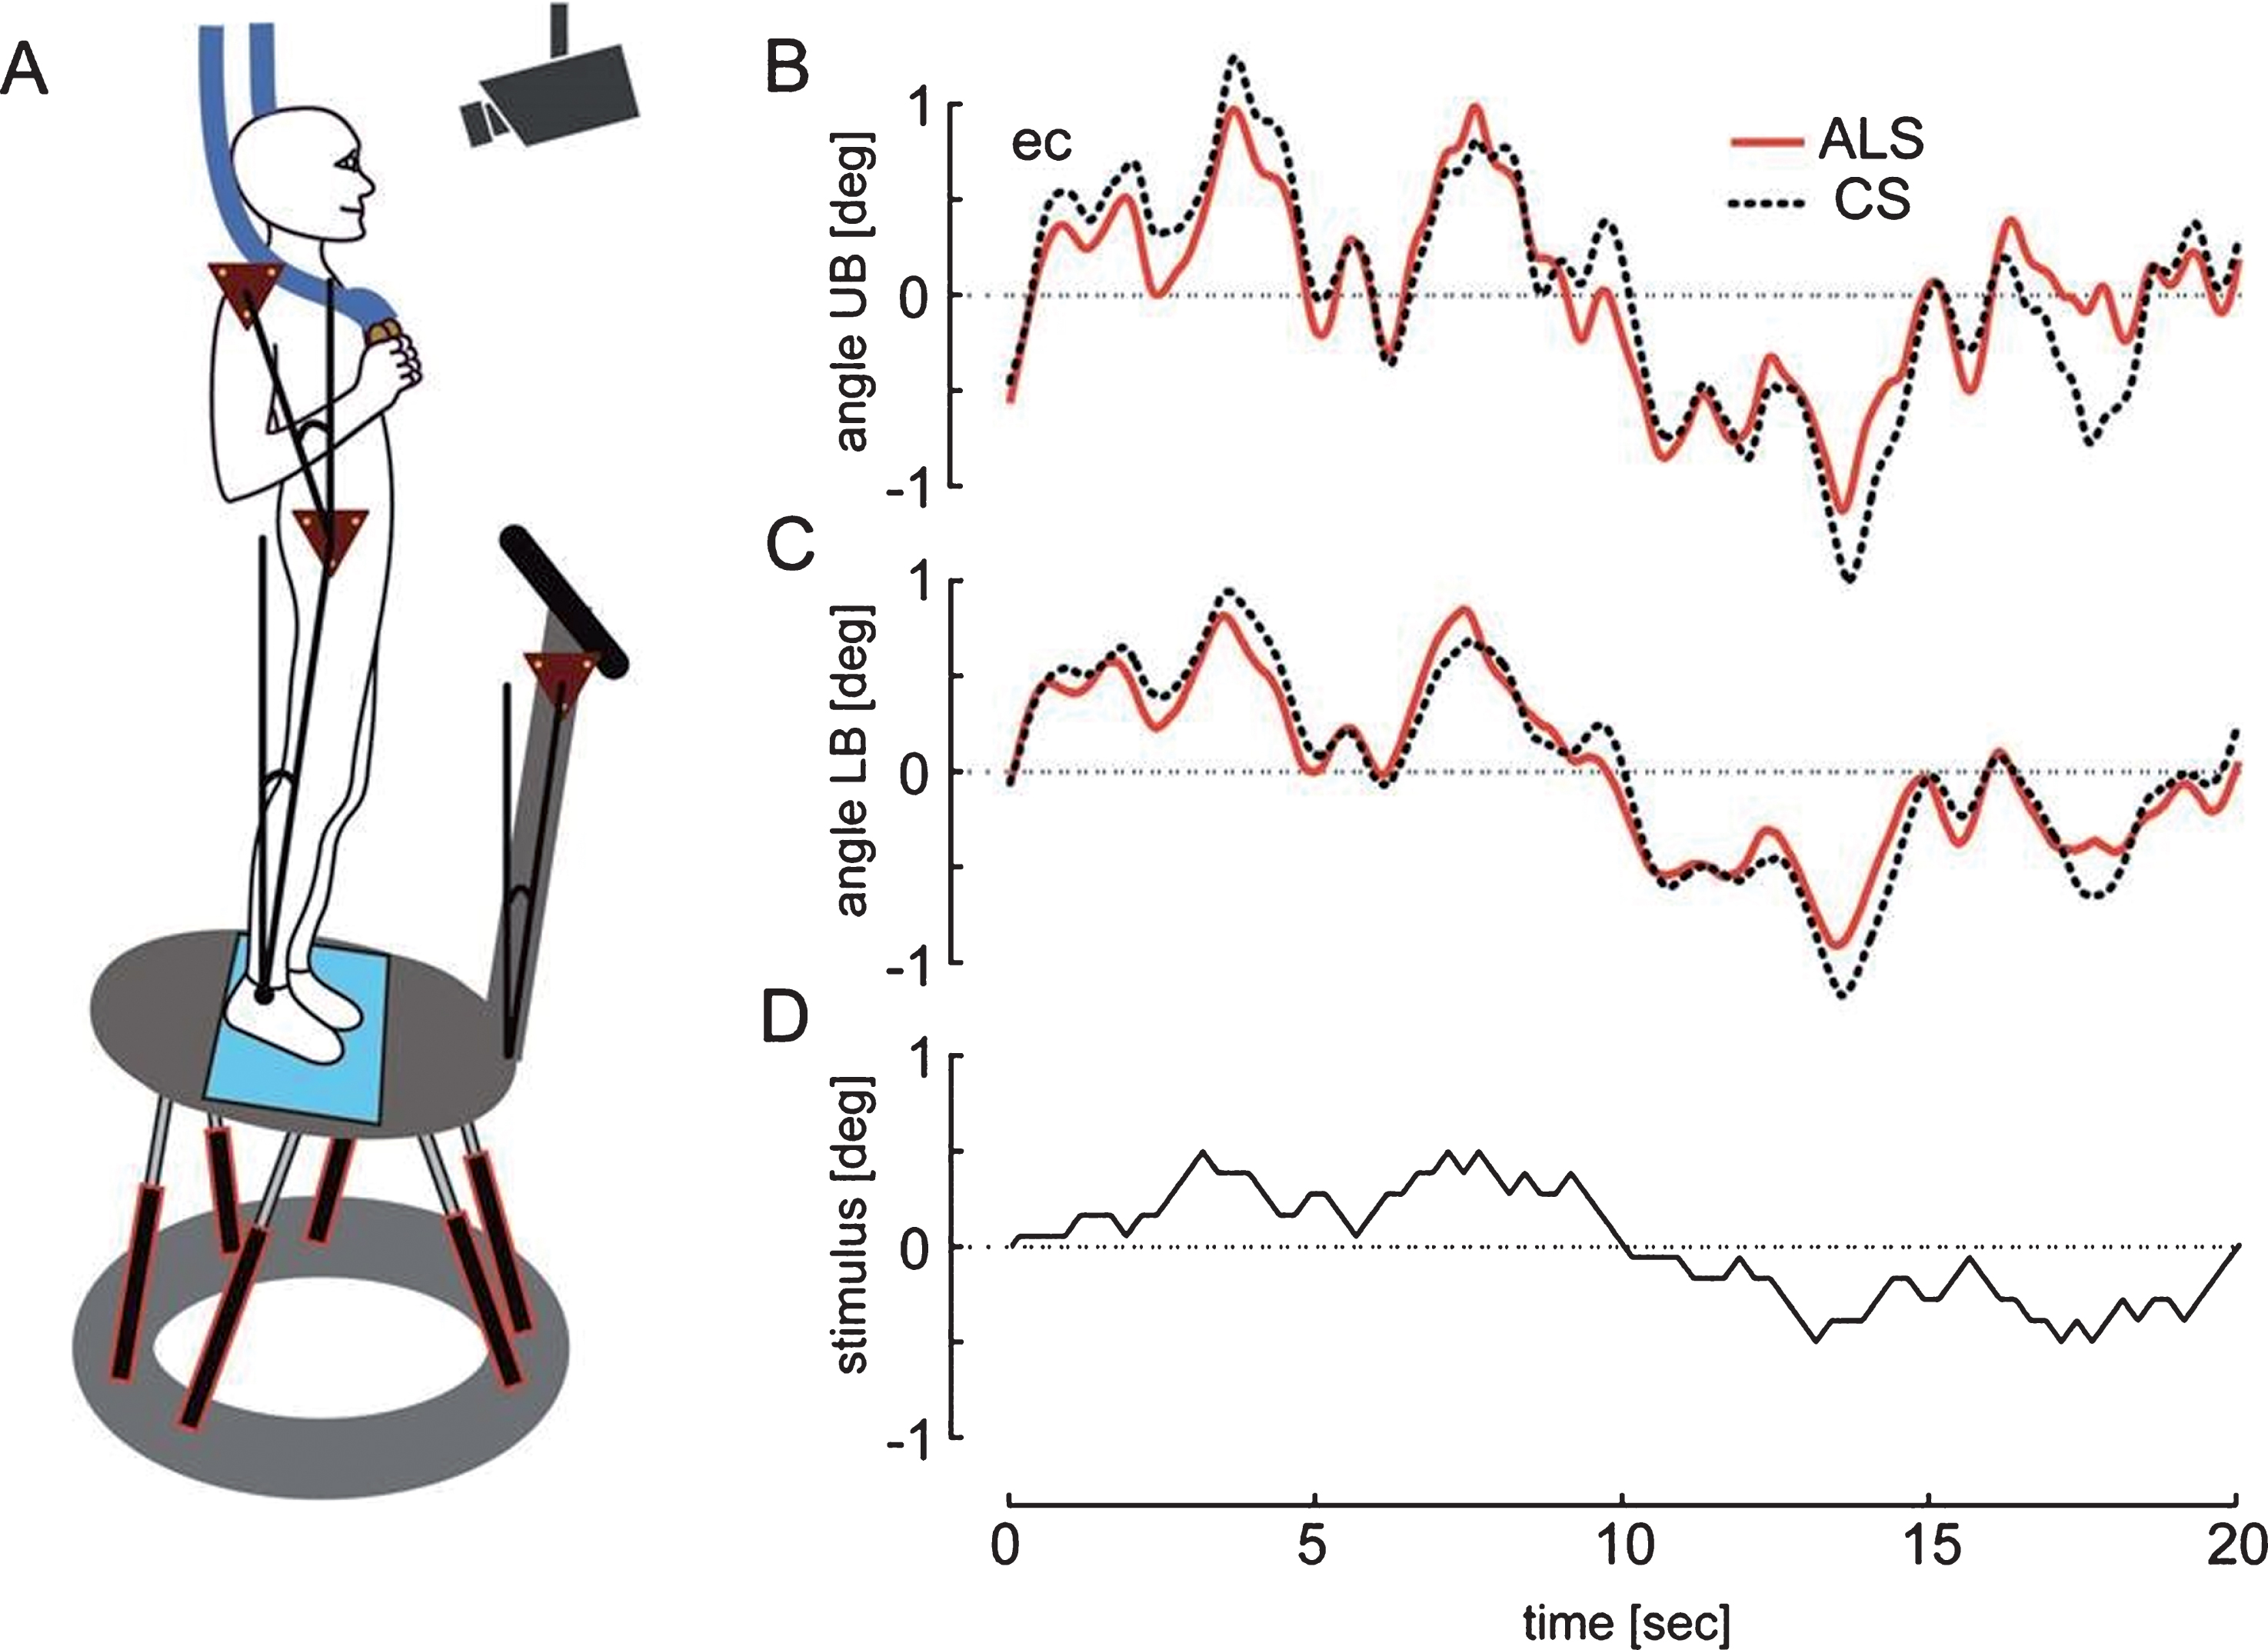 (A) Schematic representation of the experimental setting. B-D show an averaged time course of ALS patients’ and control subjects’ (CS) upper (B) and lower body (C) during platform tilts with the stimulus profile presented in D.